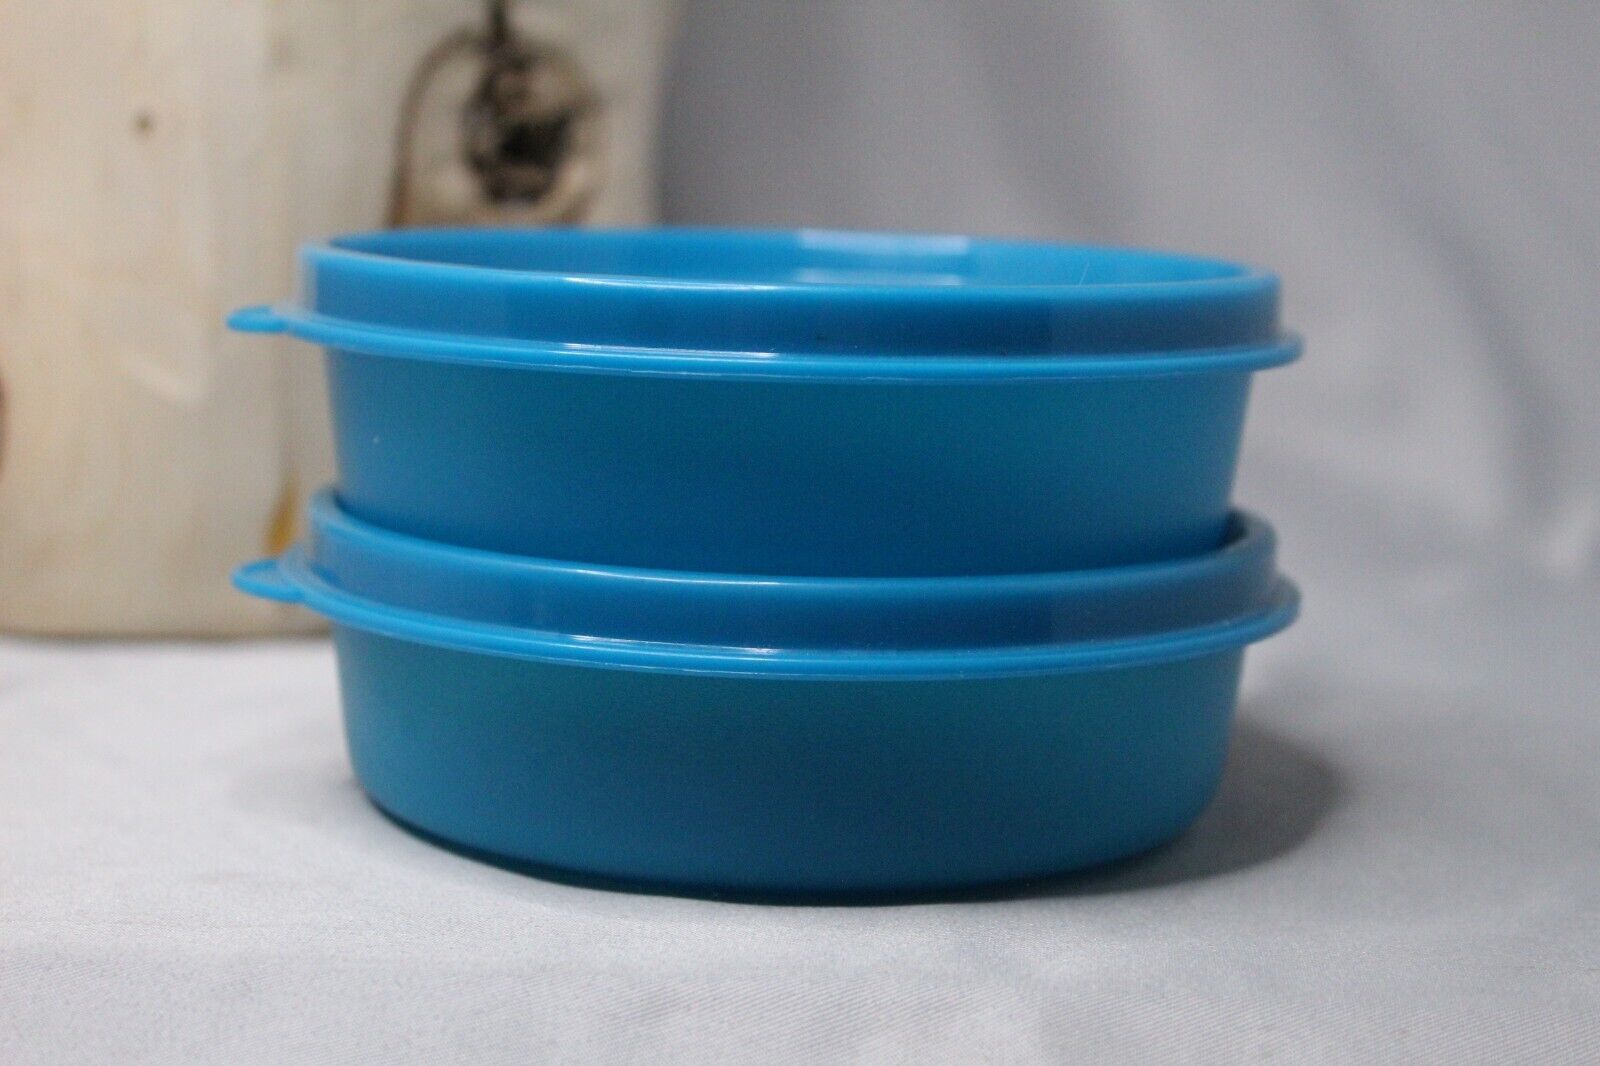 Tupperware Blue Little Wonders Bowls 14 OZ Set of Two 1286-17 With Lids - $12.46